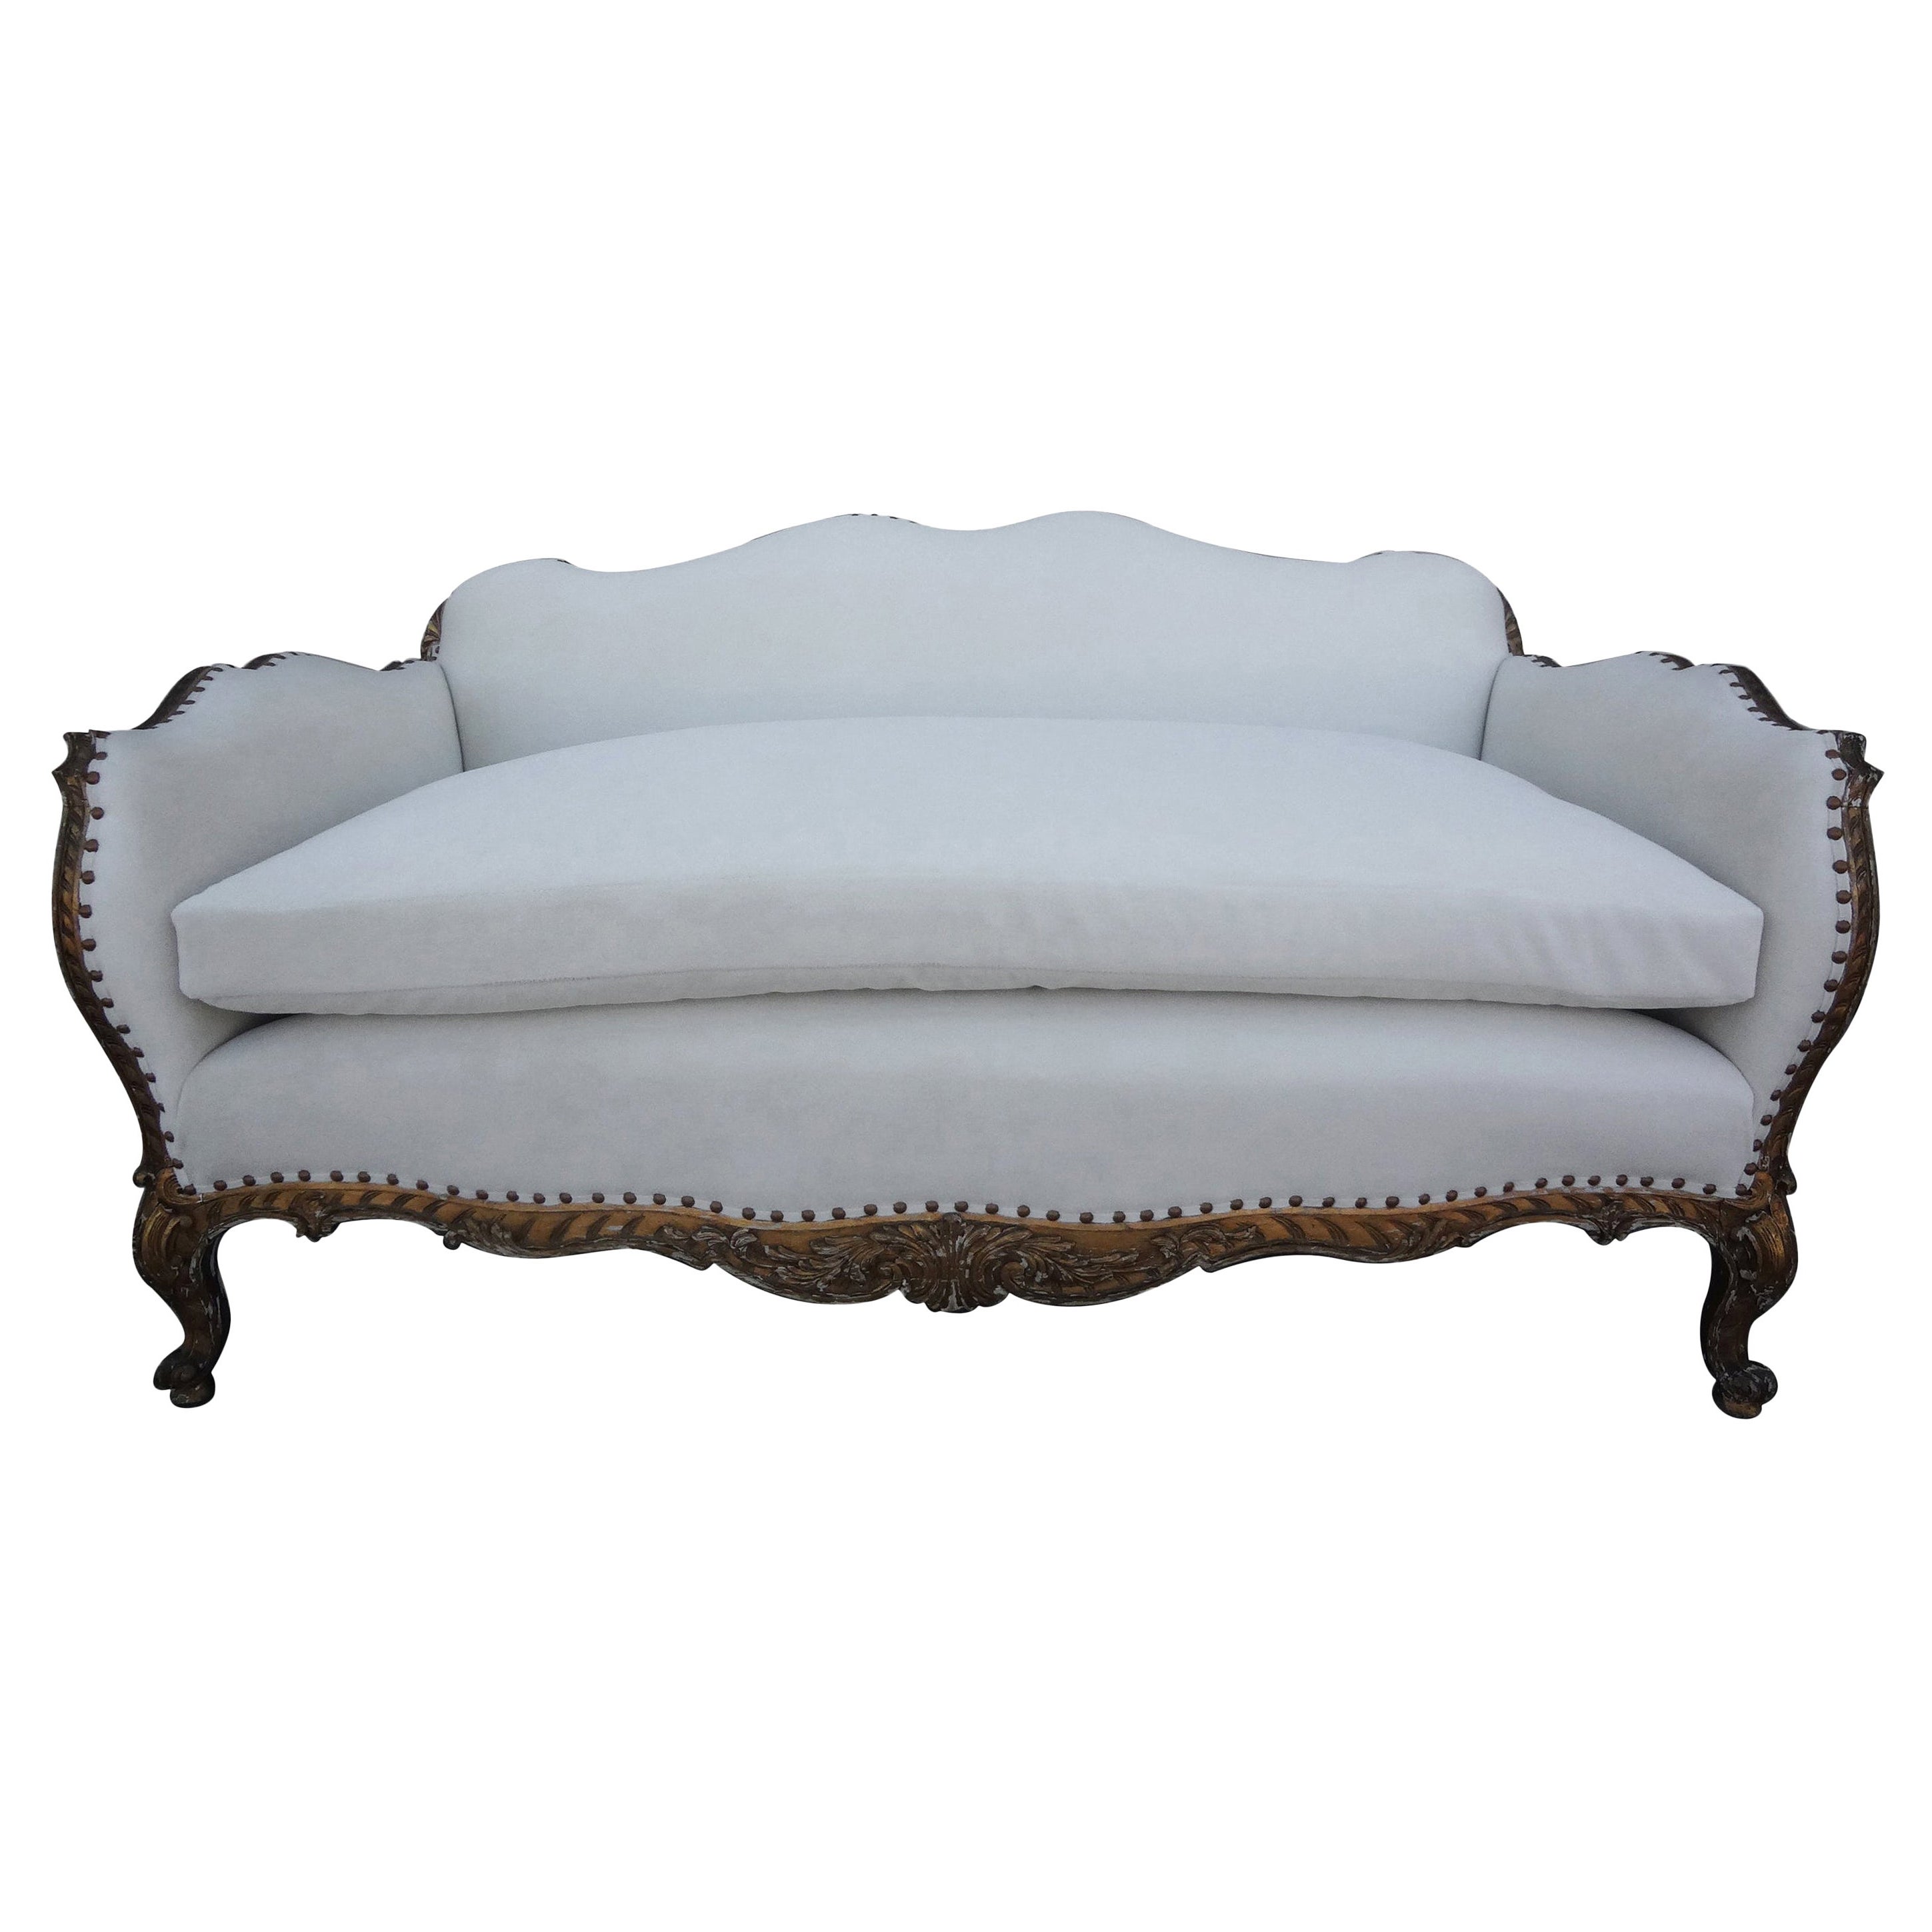 19th Century French Régence Style Giltwood Loveseat or Sofa